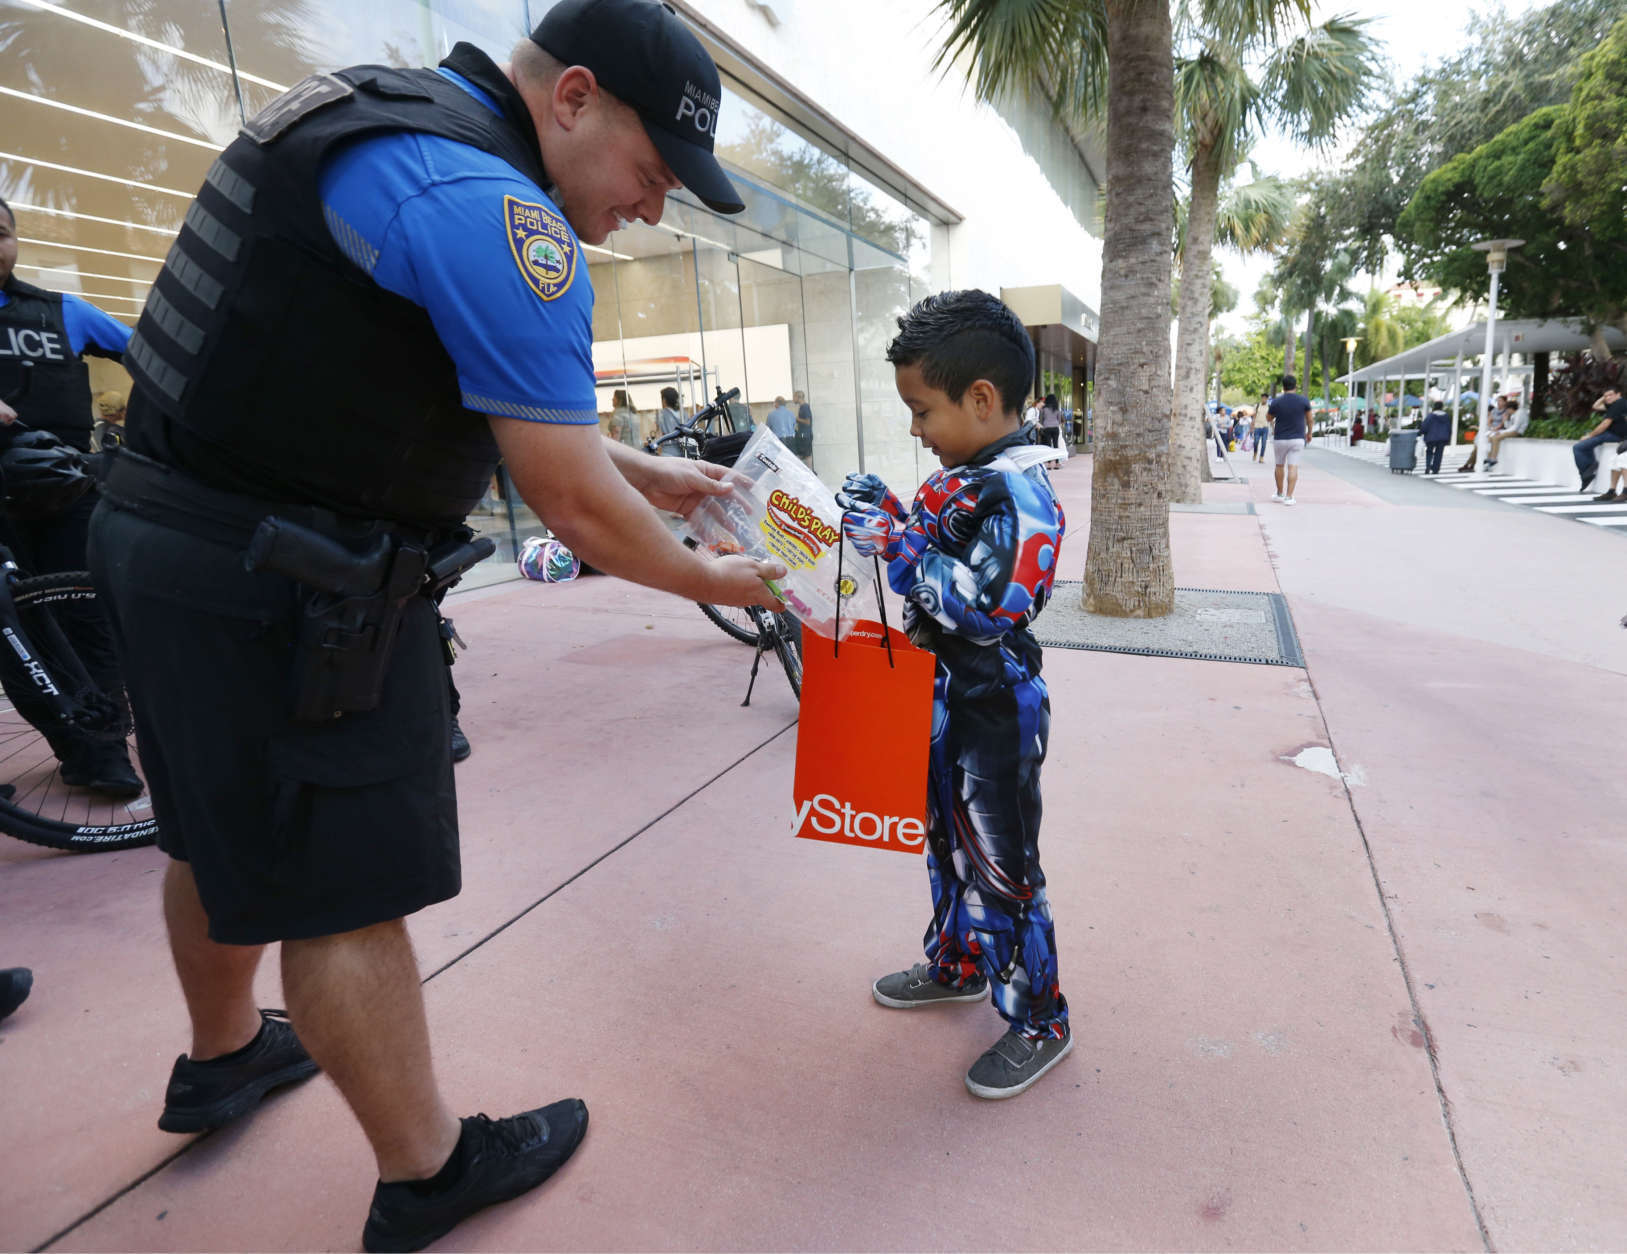 Miami Beach police officer Lee Clair, left, hands out candy to trick-or-treaters like Christopher Rincon, 7, along the Lincoln Road pedestrian mall for Halloween, Tuesday, Oct. 31, 2017, in the South Beach neighborhood of Miami Beach, Fla. (AP Photo/Wilfredo Lee)